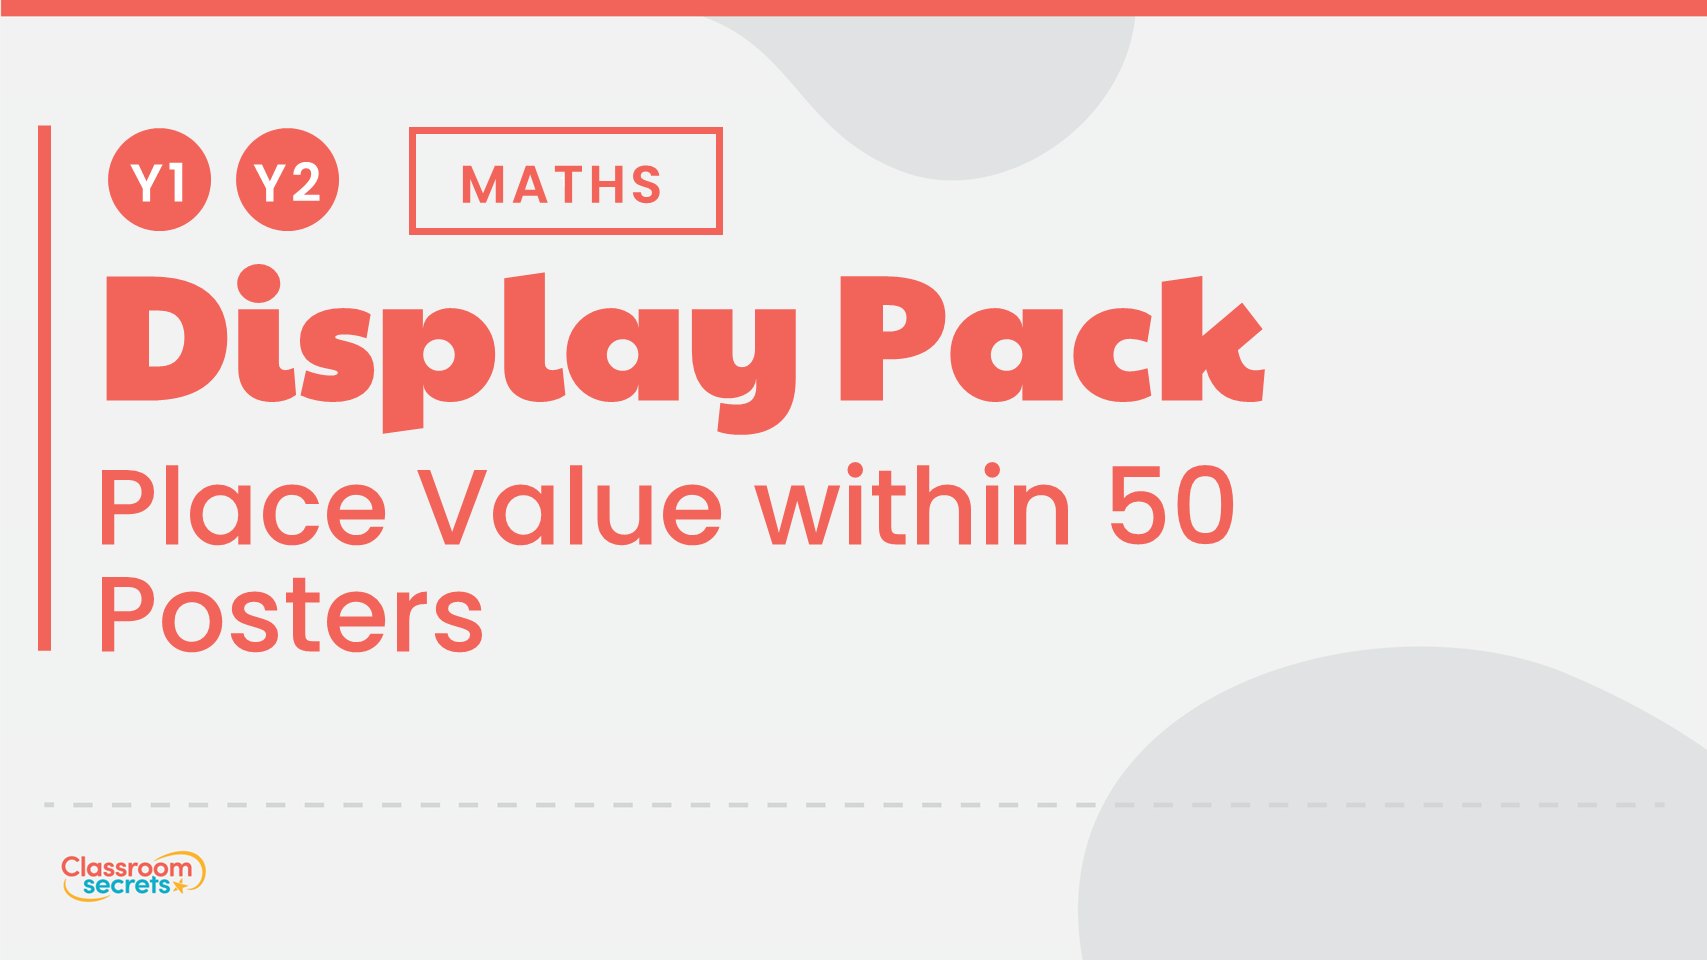 Place Value within 50 Display Pack